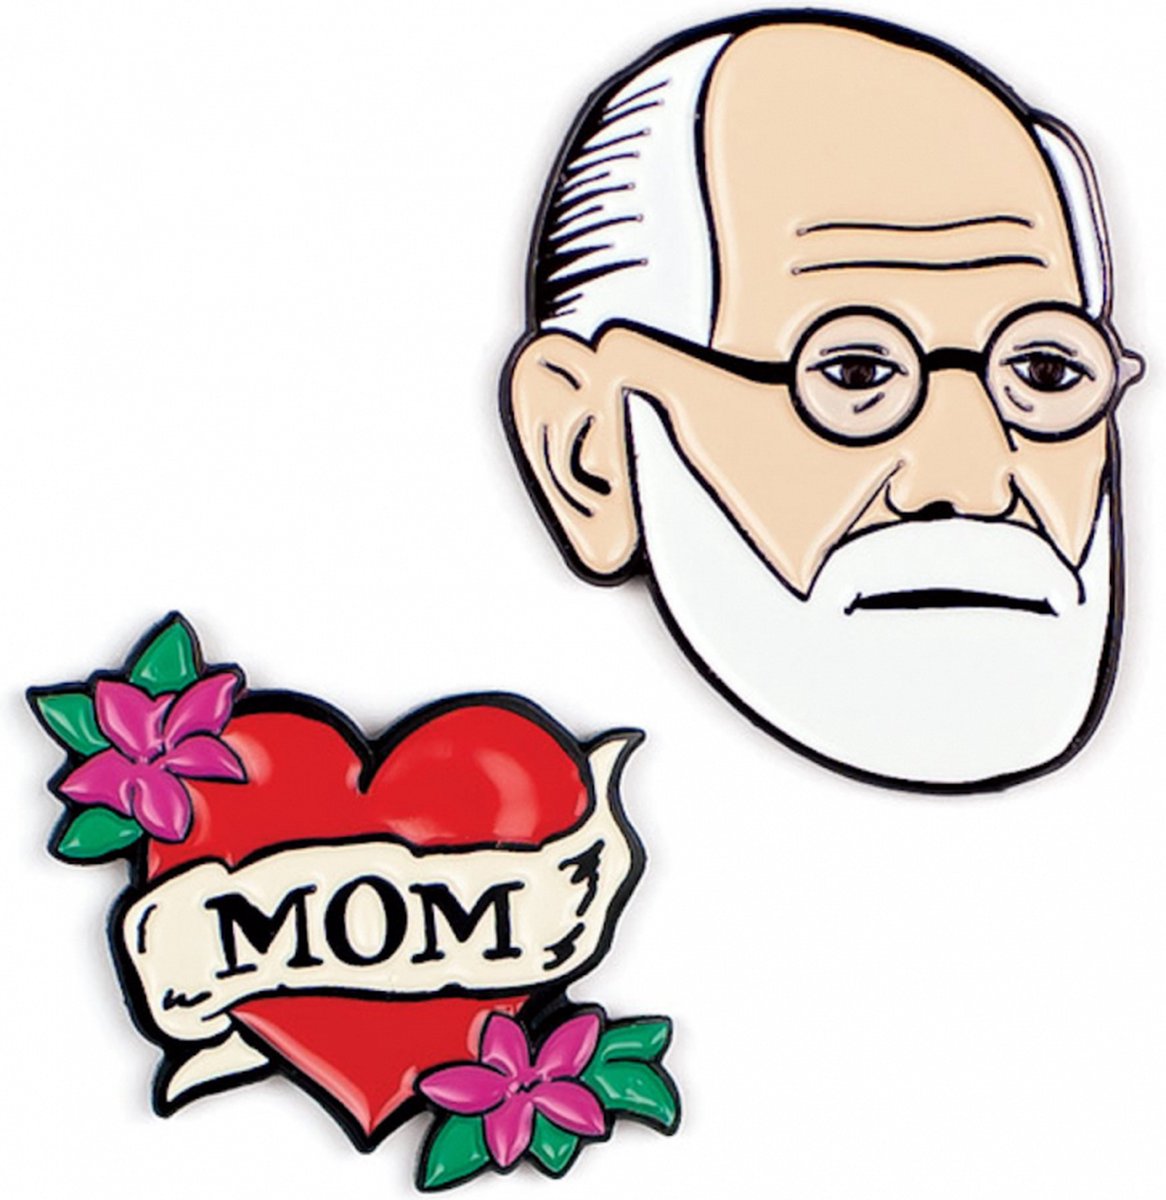 UPG Pins - Freud and Mom